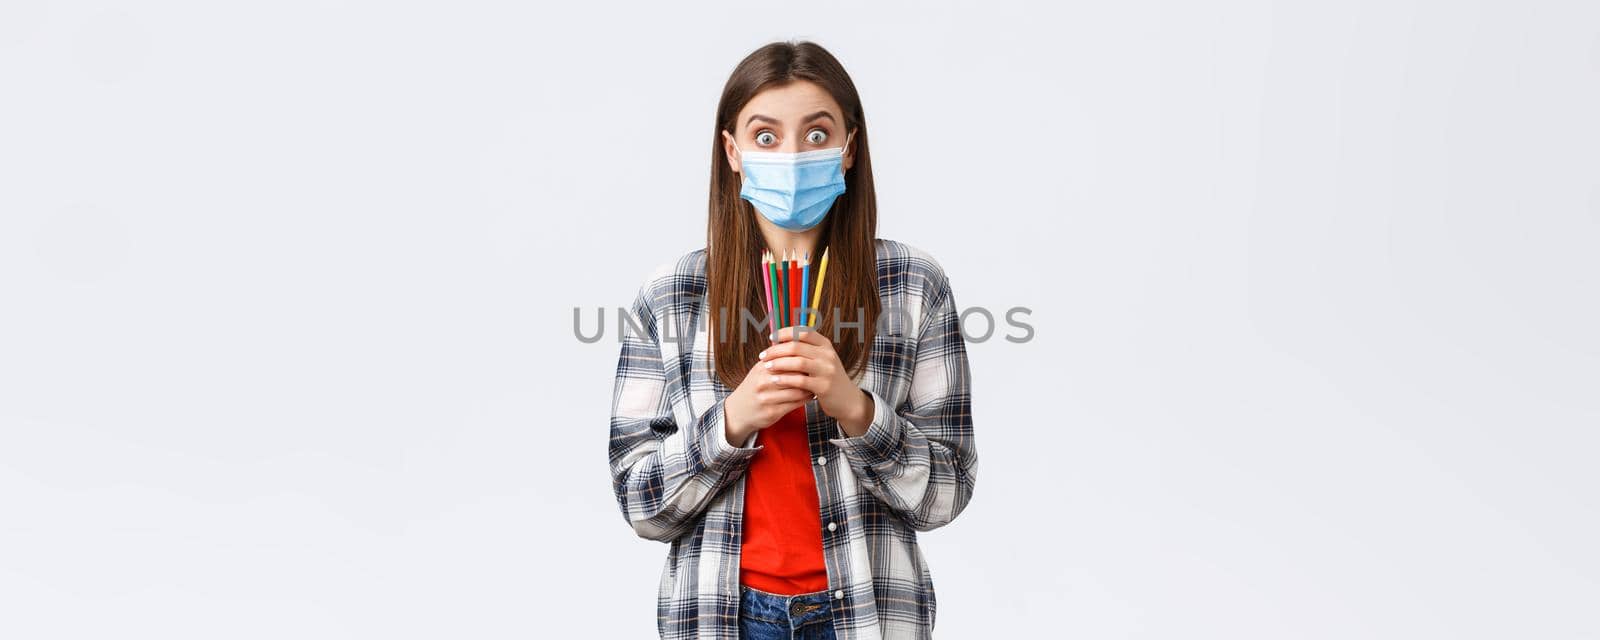 Social distancing, leisure and hobbies on covid-19 outbreak, coronavirus concept. Enthusiastic cute girl in medical mask trying new thing on self-quarantine, showing colored pencils, learn how draw by Benzoix